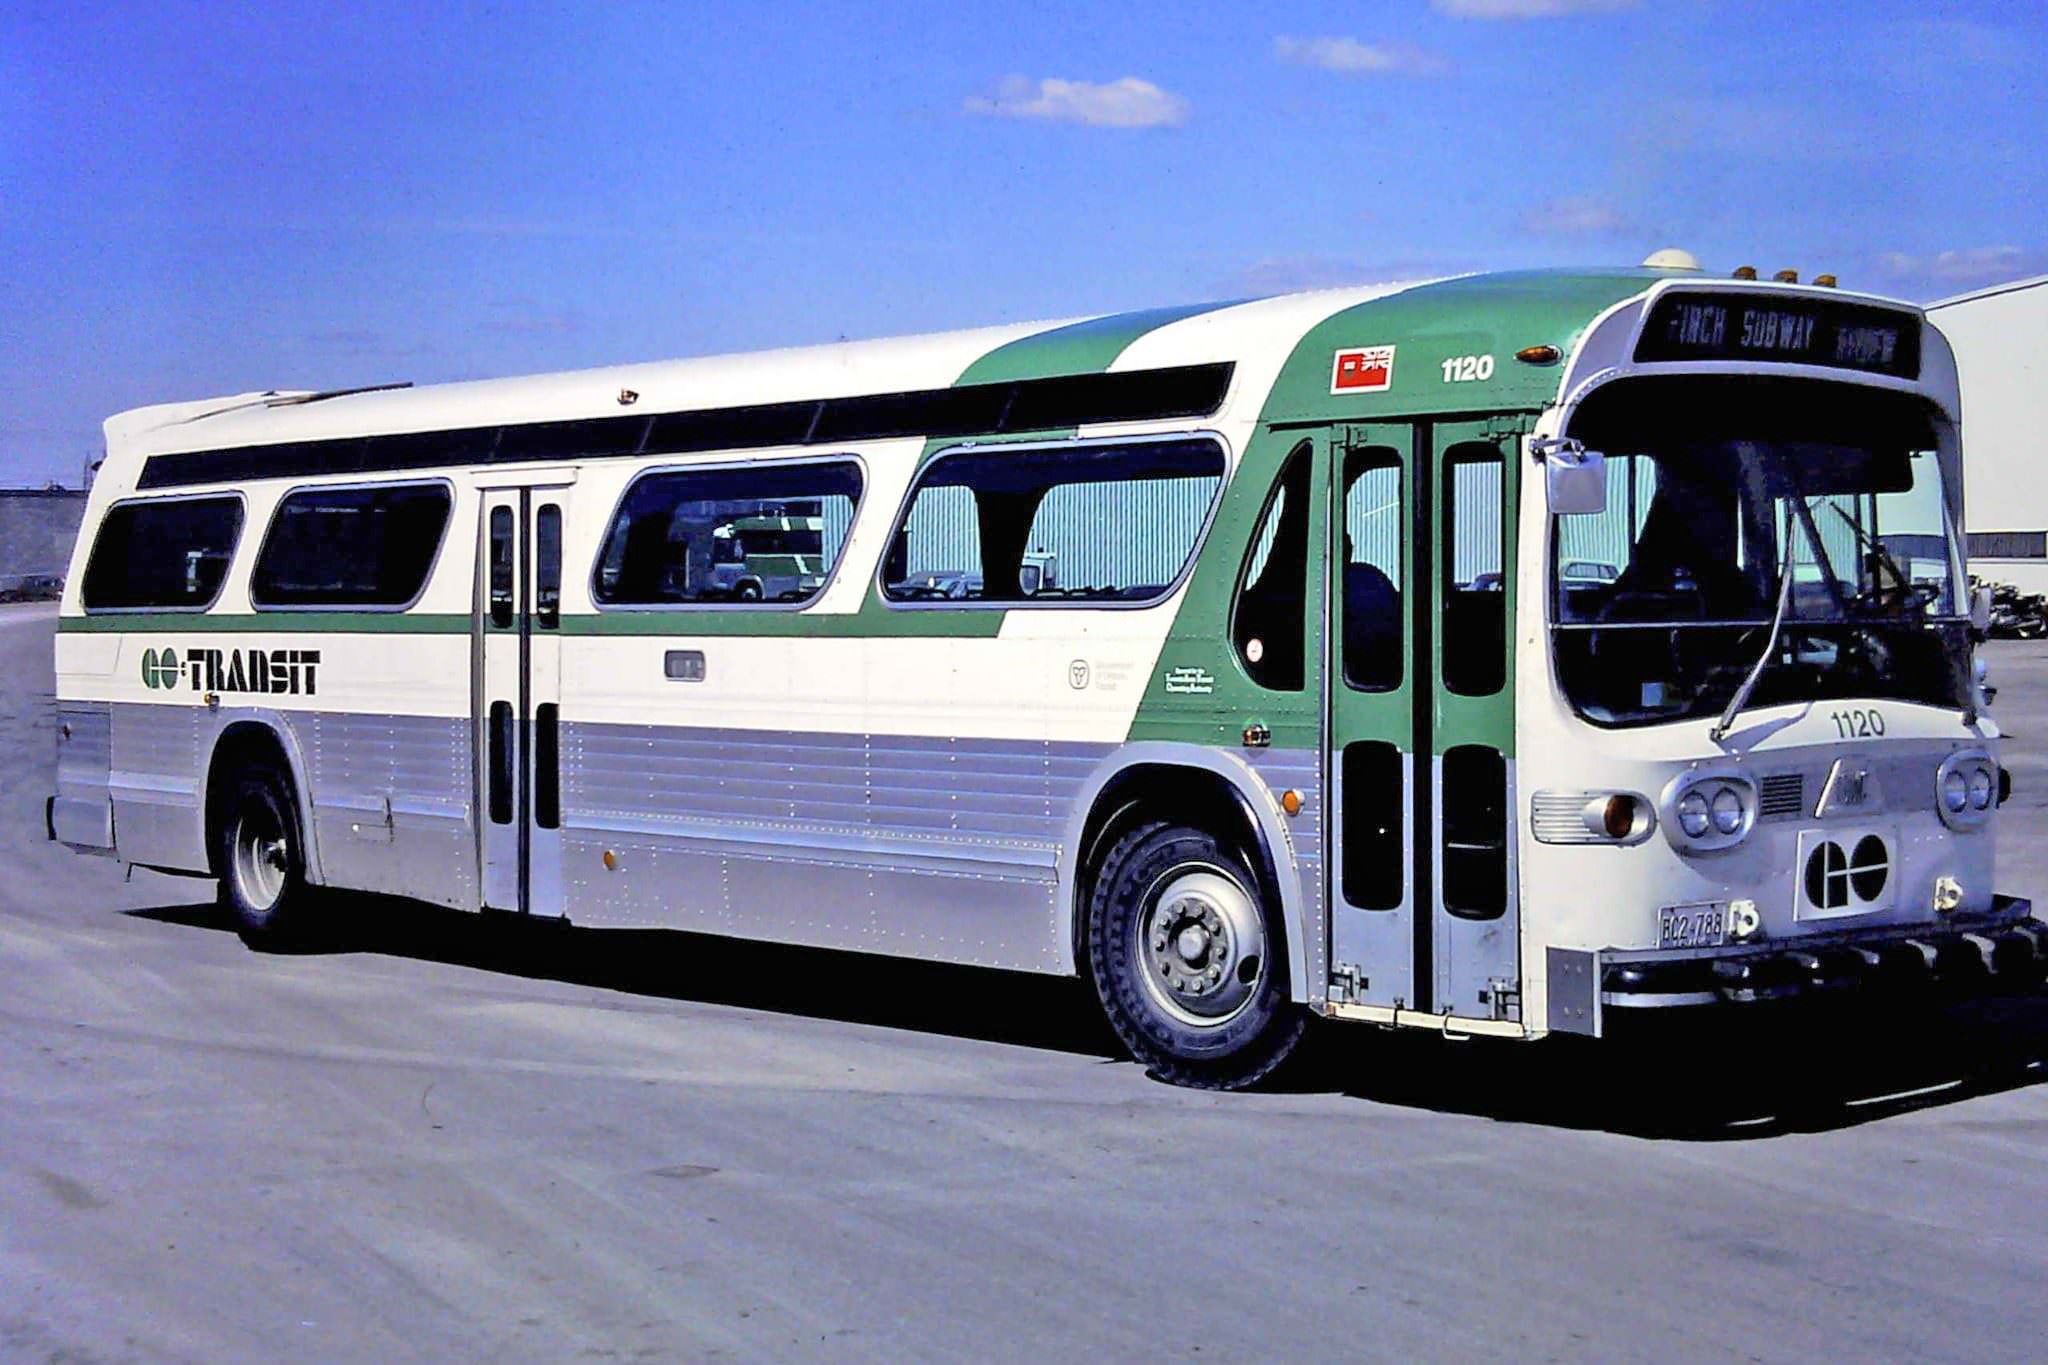 This year marks the 50th anniversary of GO Transit bus operations. Here is a great Ted Wickson shot of General Motors GO Transit 1120 bus from around the mid-1970s.